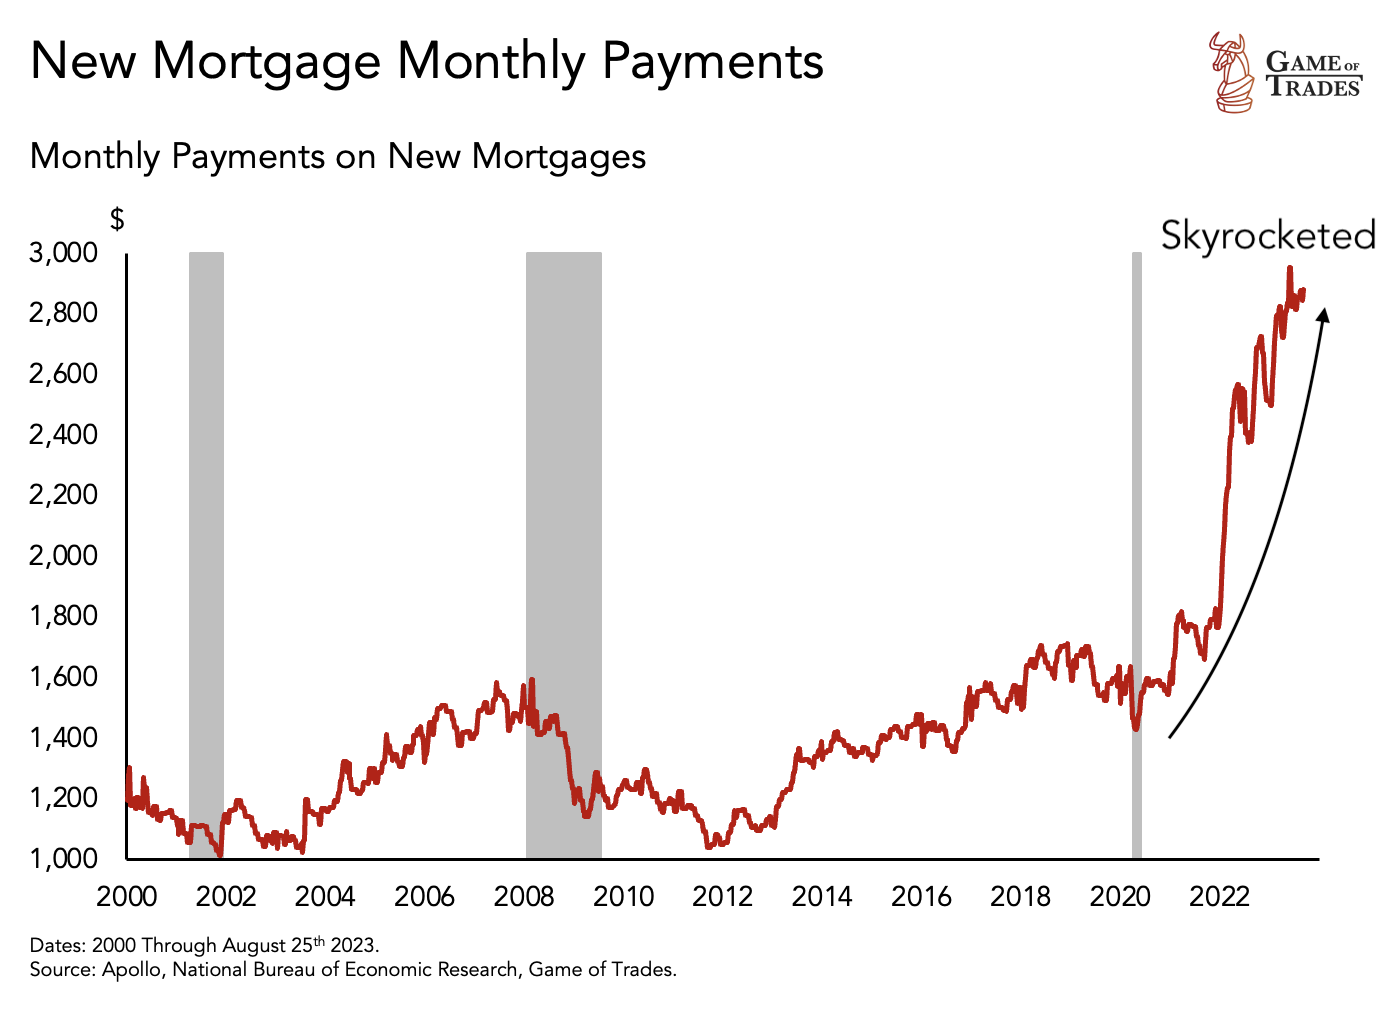 Monthly payment on new mortgages